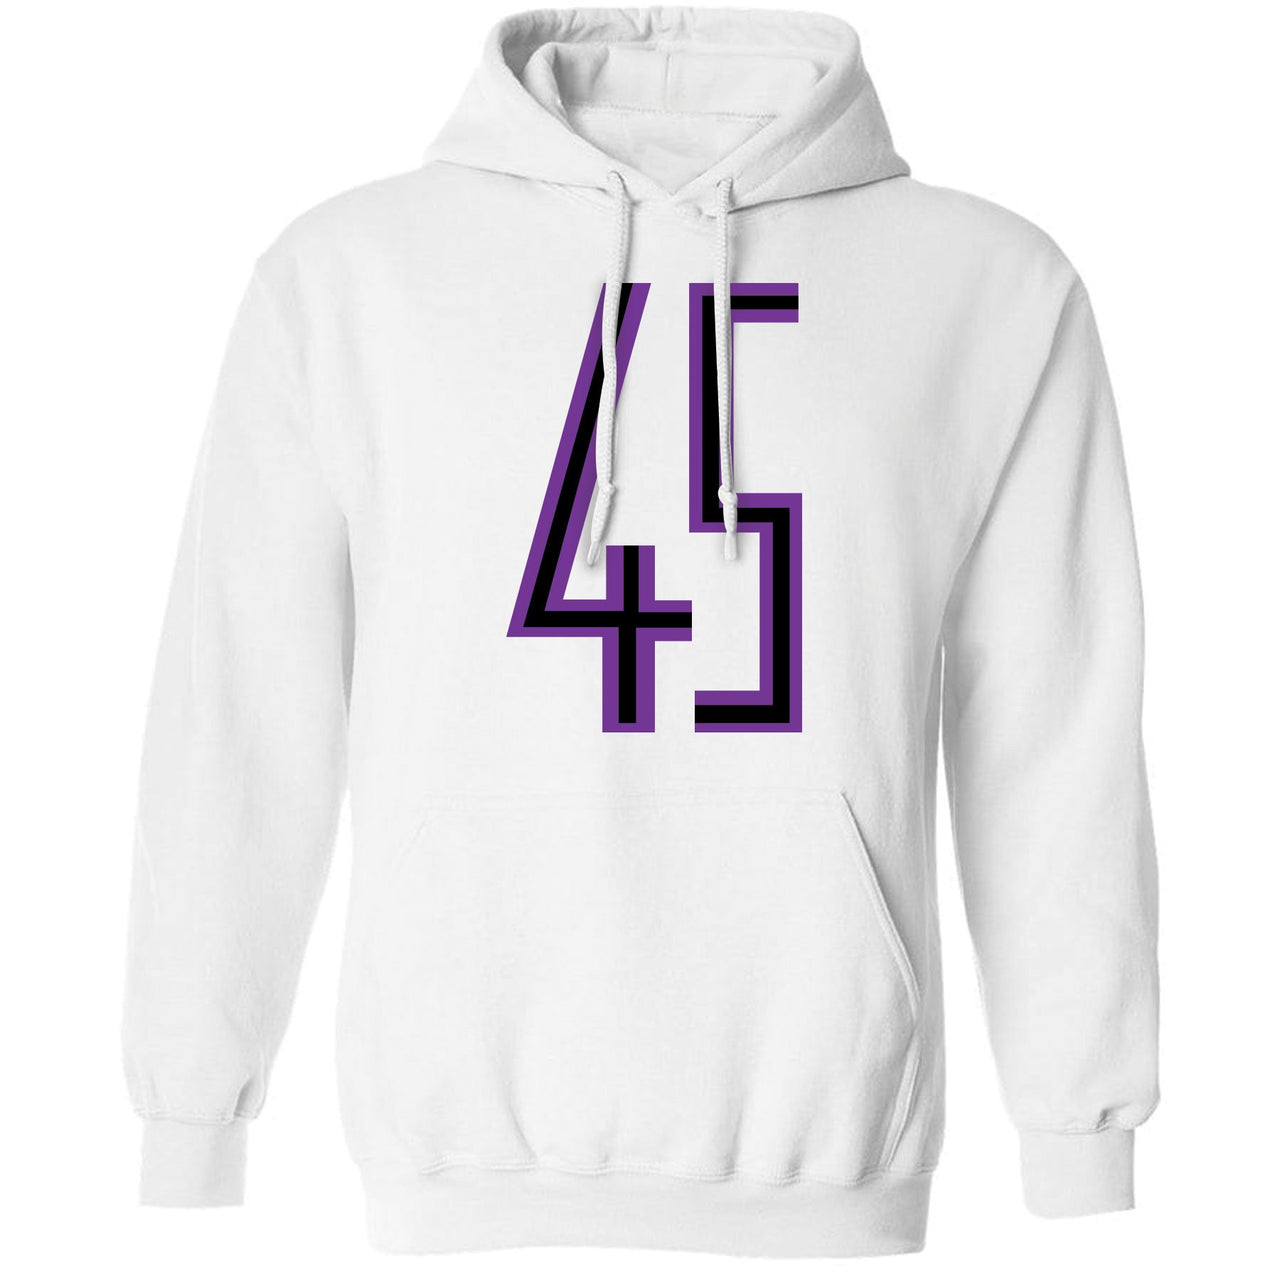 Printed on the front of the white pullover Jordan 11 Concord 45 sneaker matching hoodie is the 45 logo in purple and black